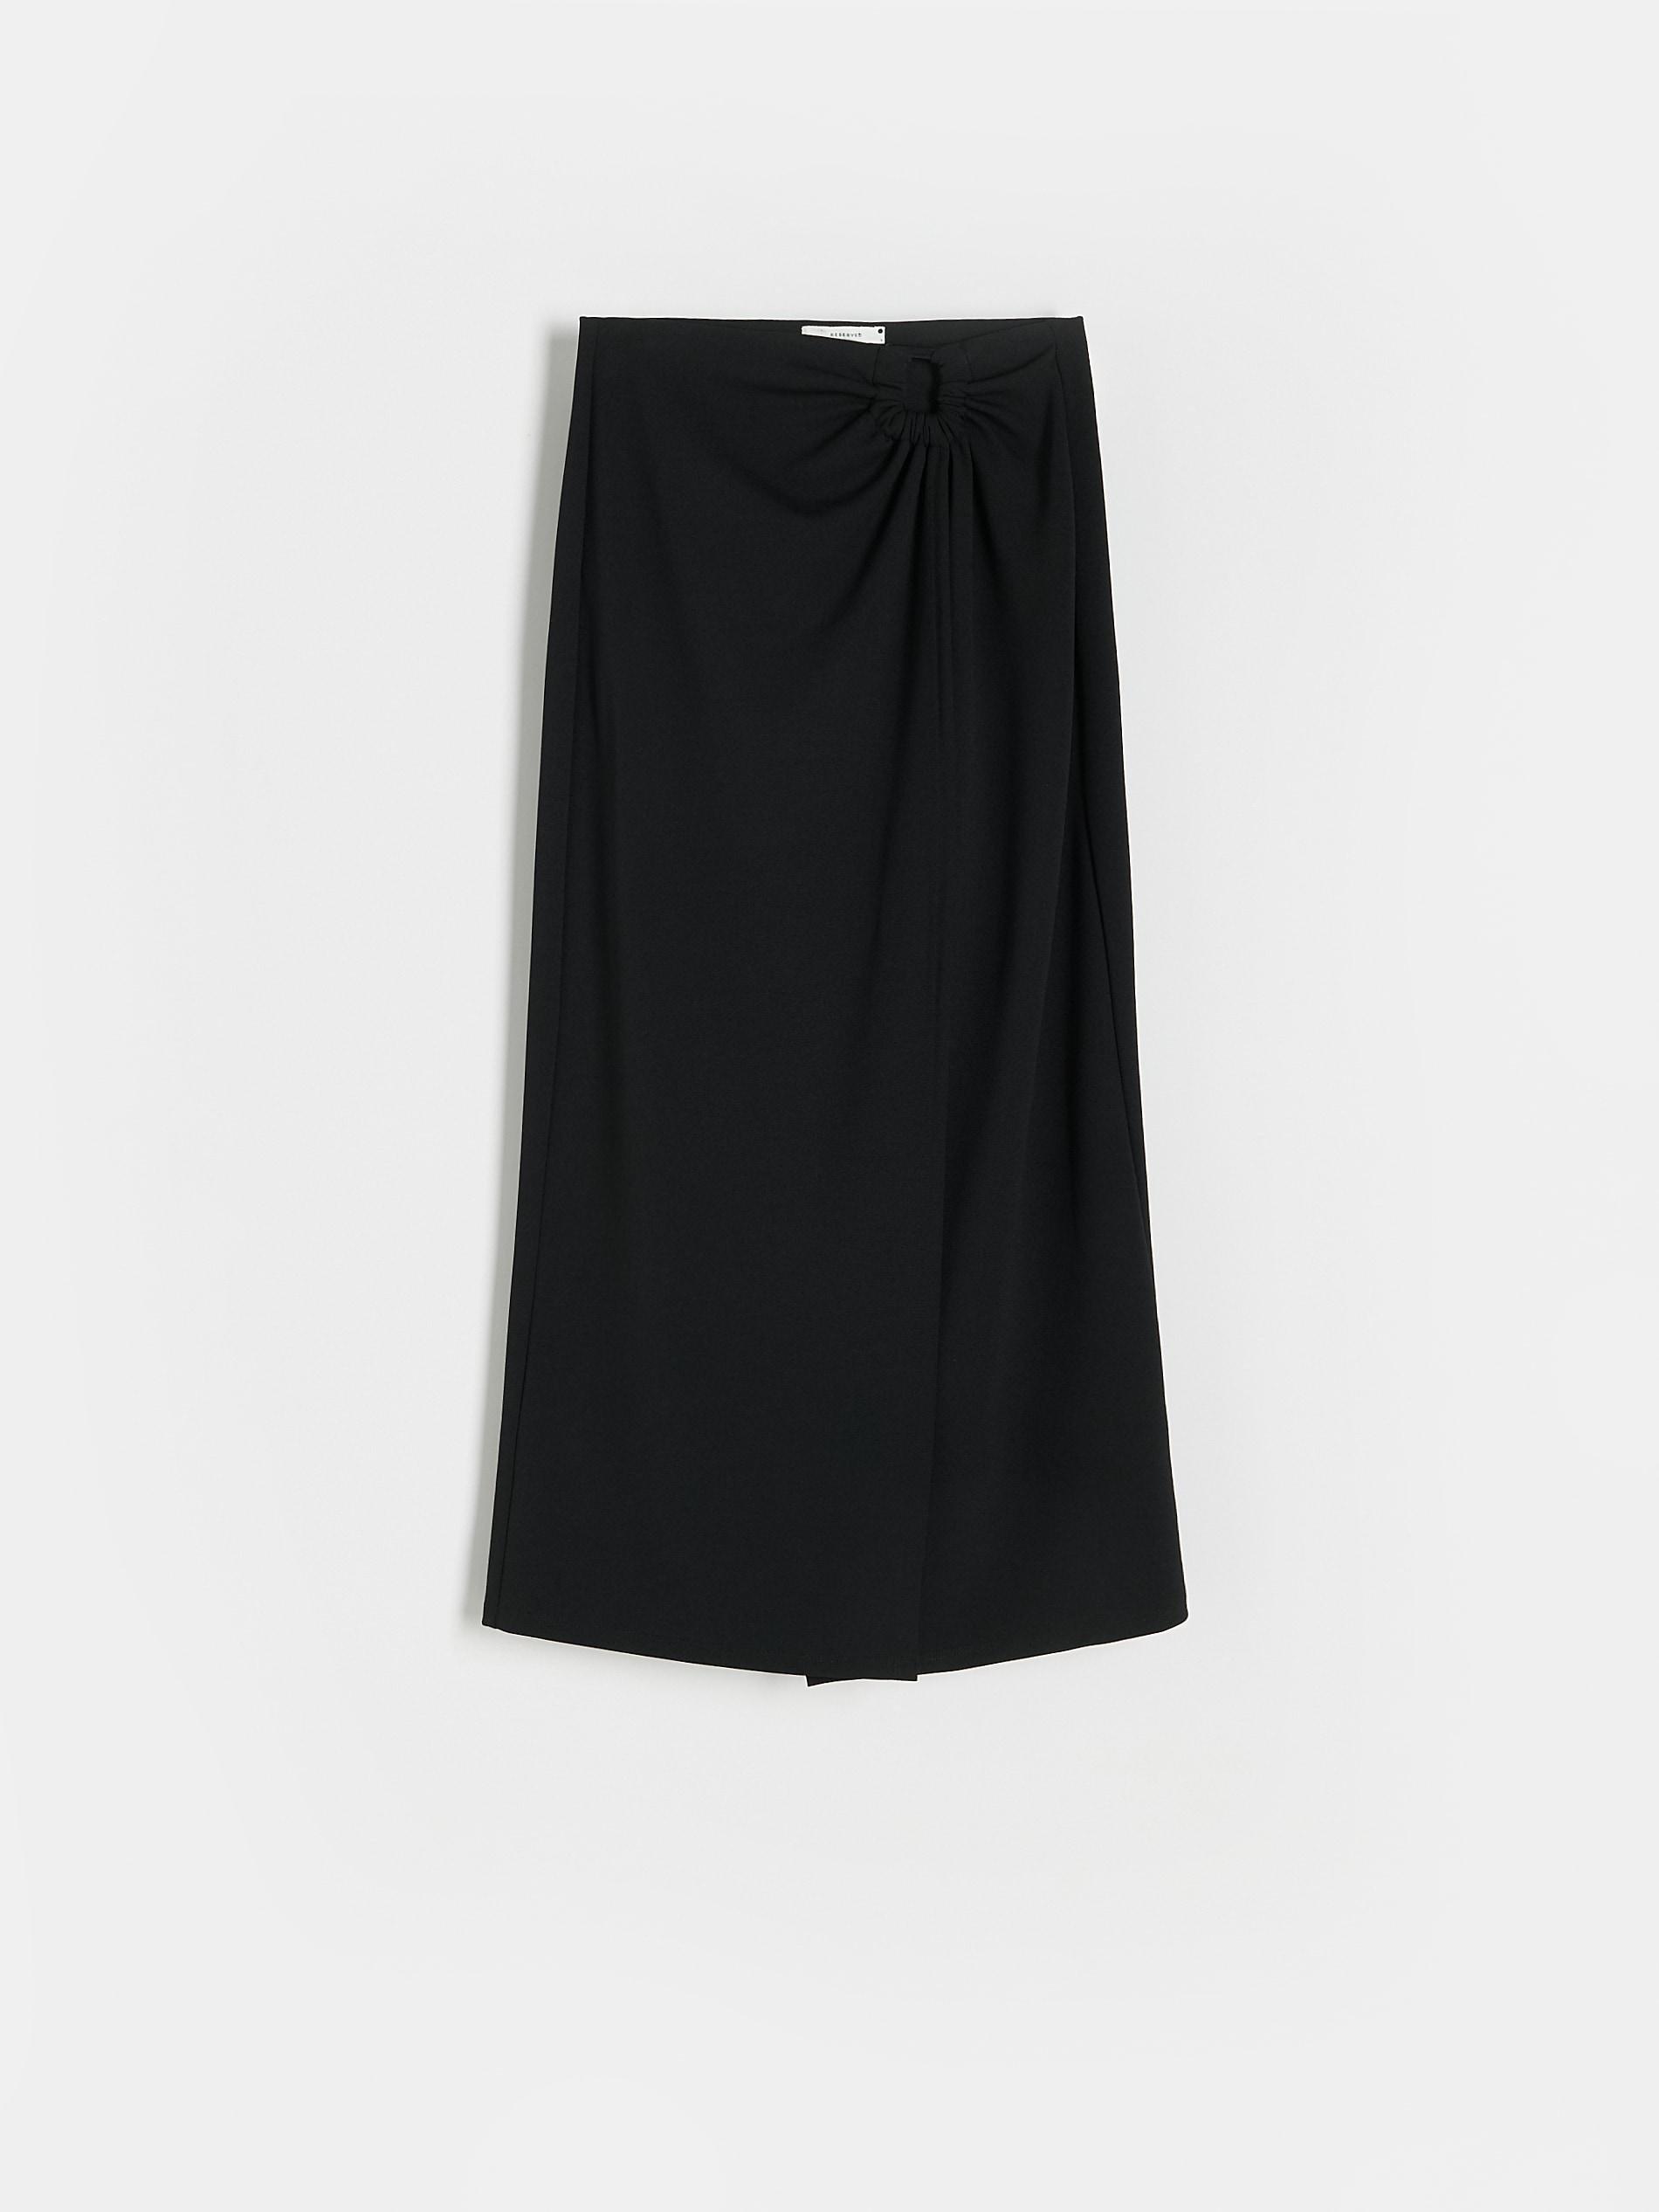 Reserved - Black Ruched Skirt